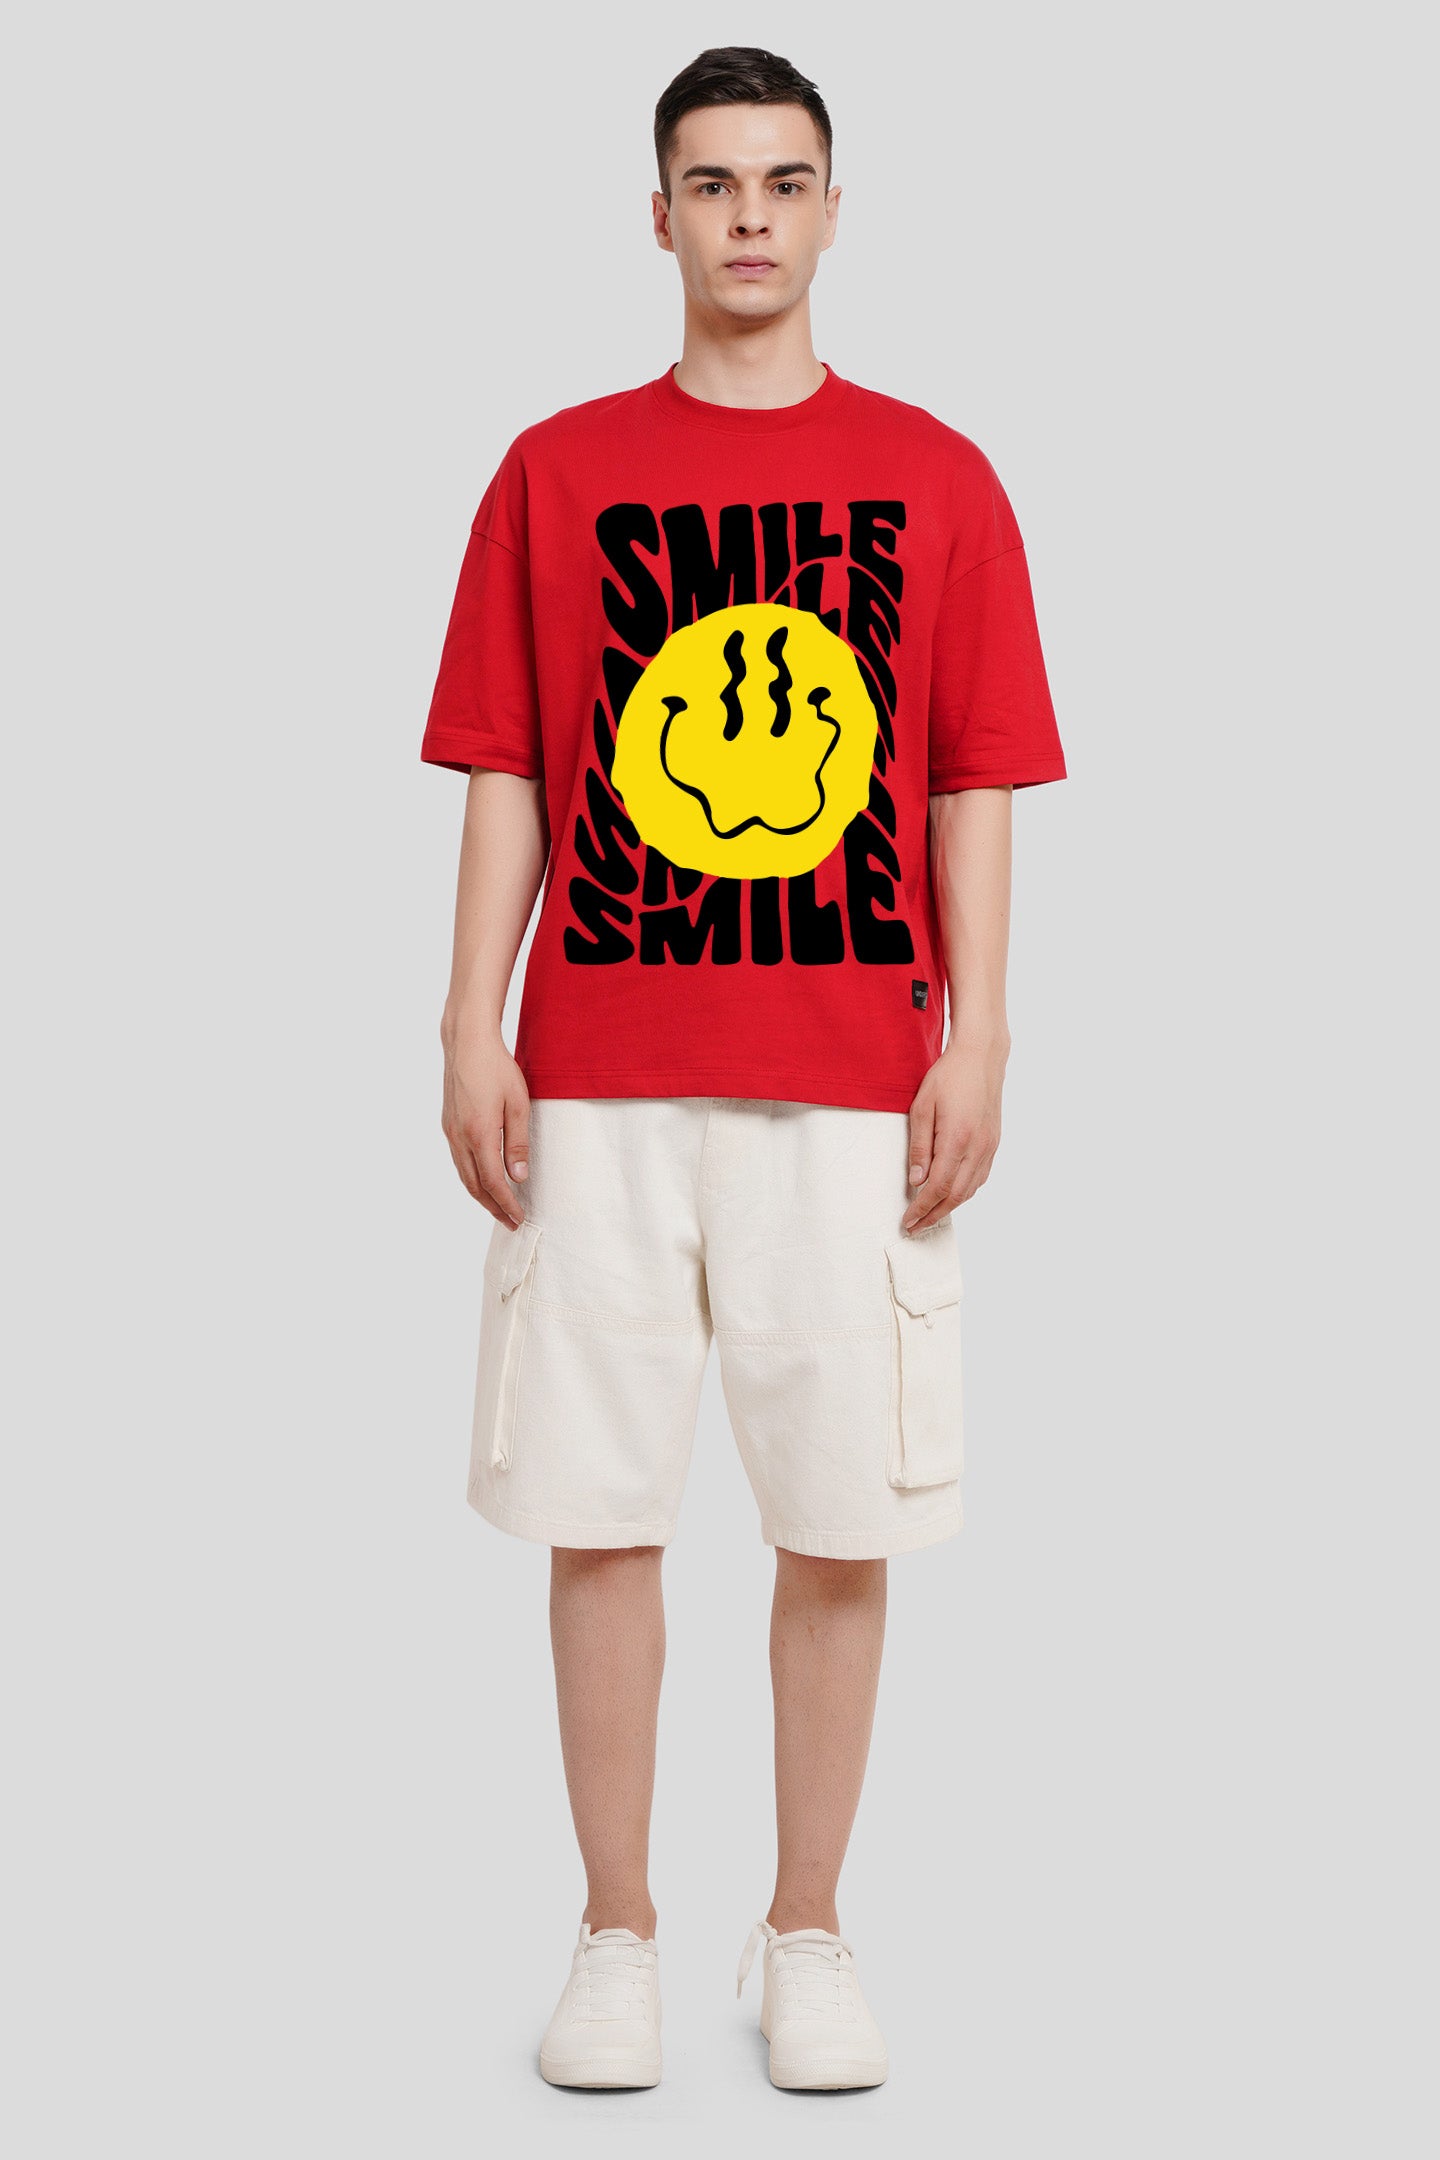 Smile Red Printed T Shirt Men Baggy Fit With Front Design Pic 4